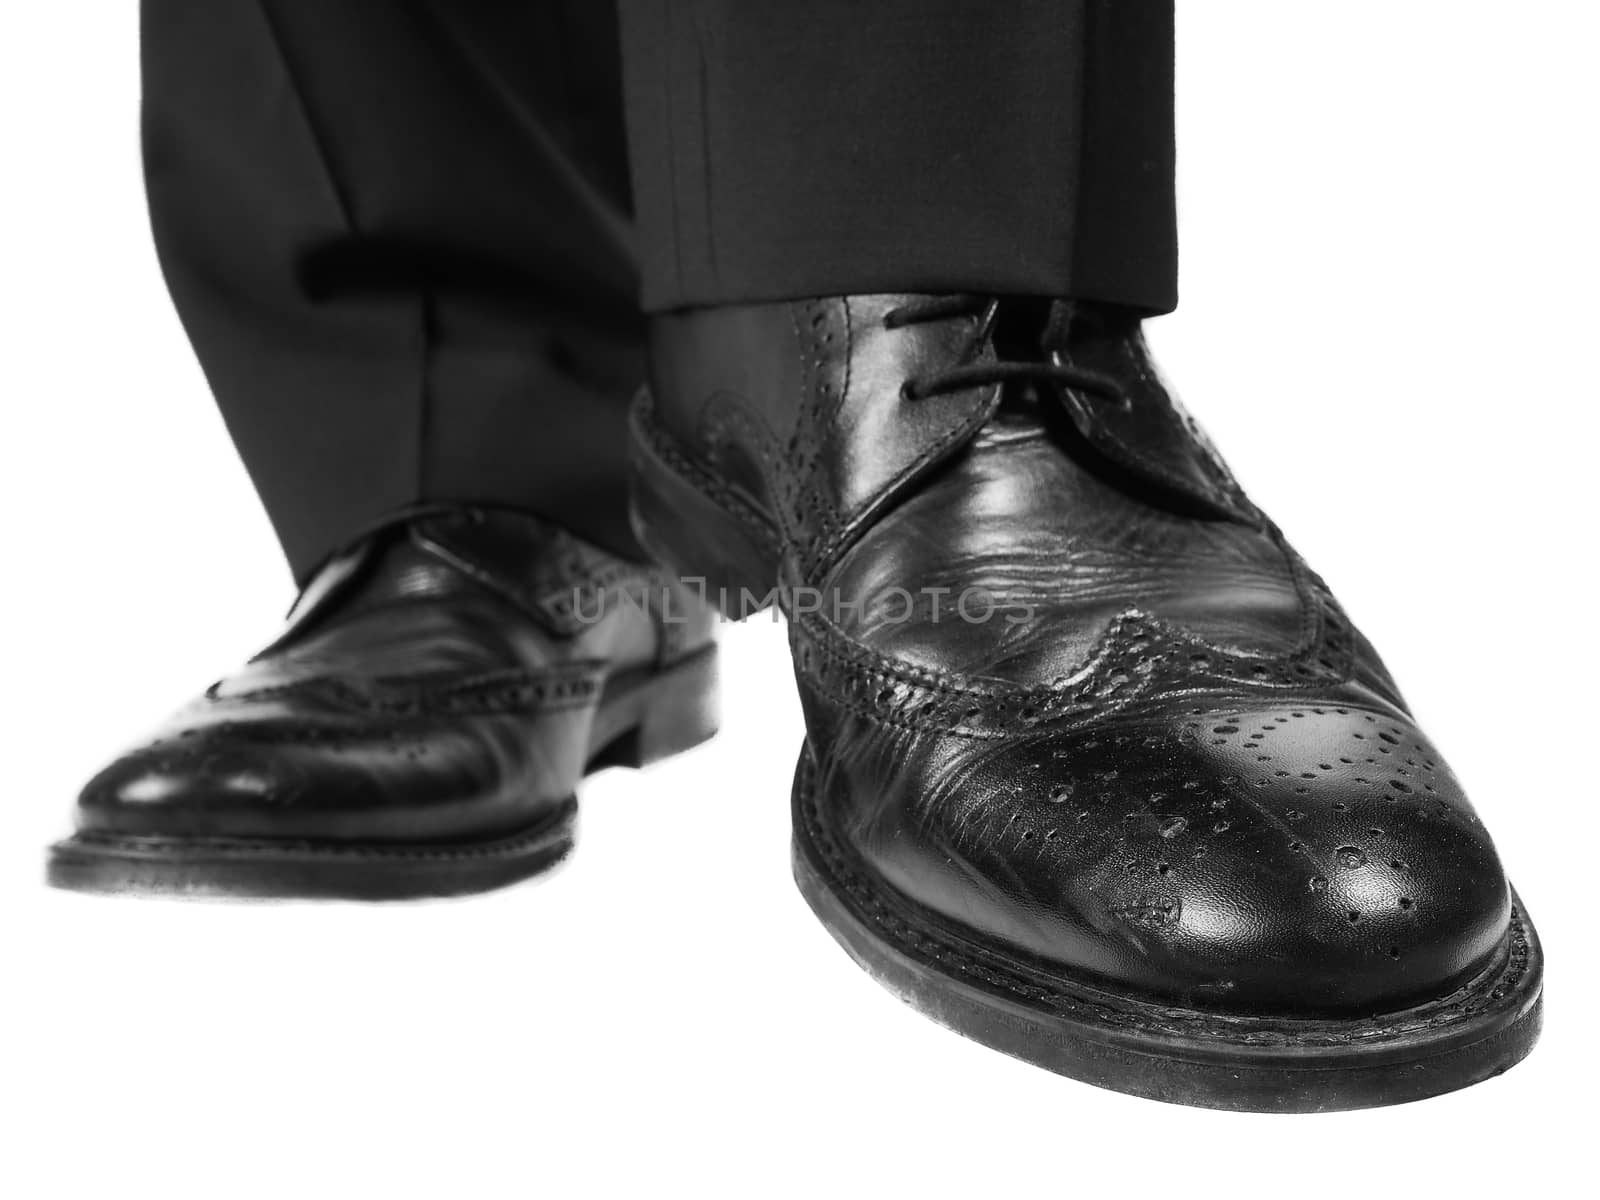 Male person in black suit and leather shoes lifting one shiny shoe towards white